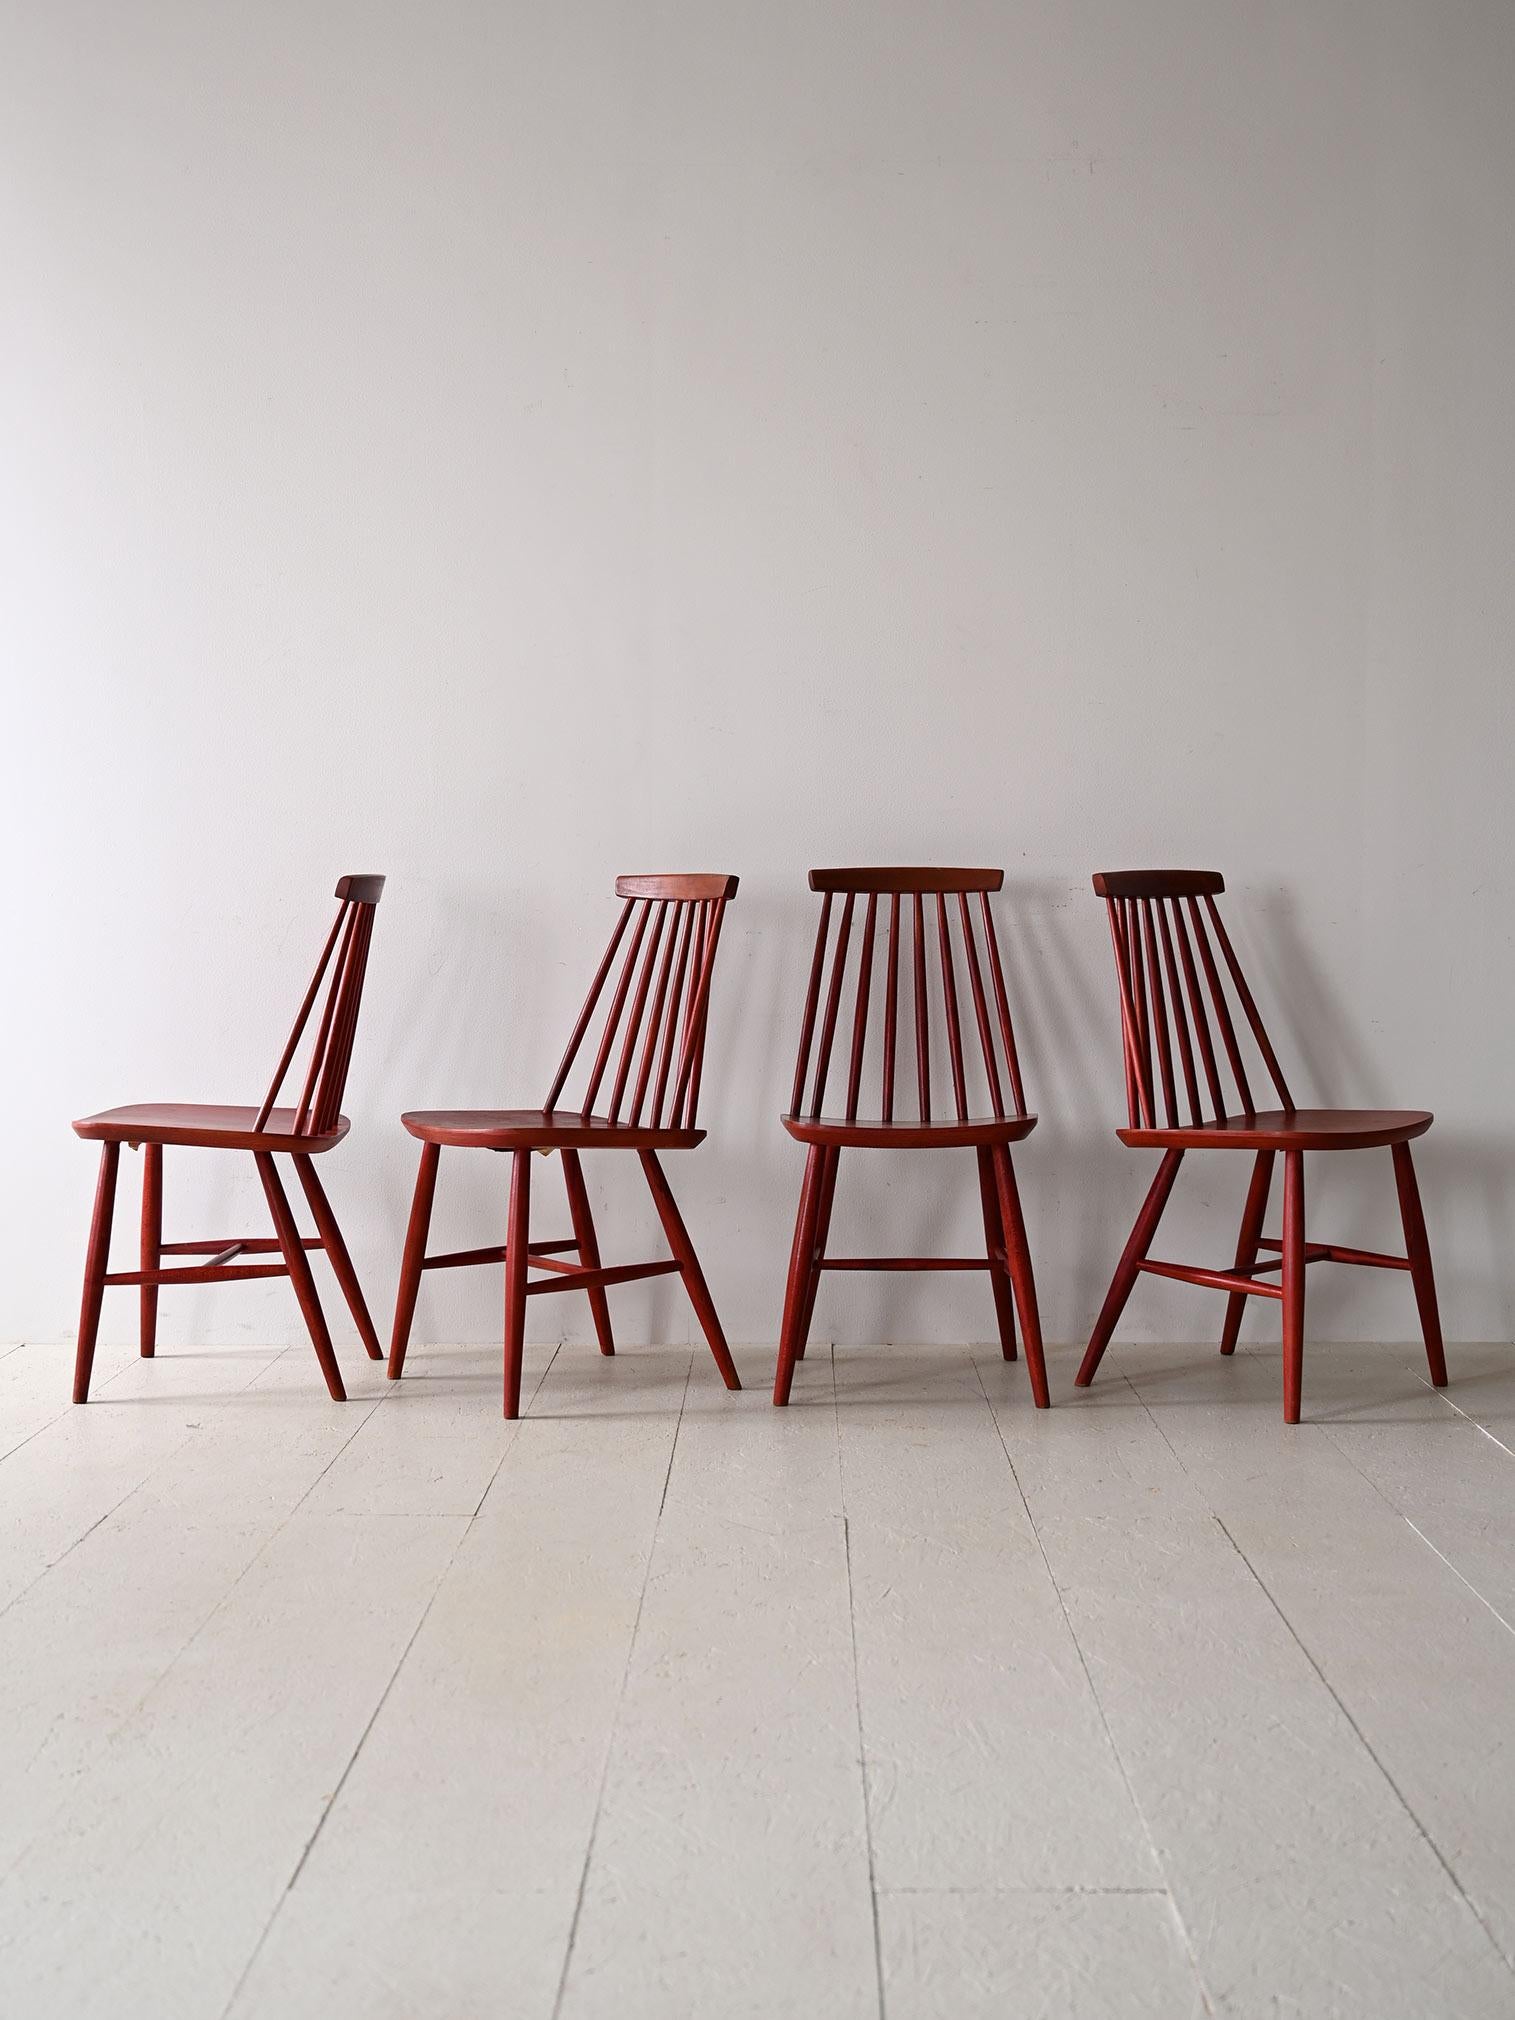 Set of 4 original 1960s wooden chairs.

This chair model typical of Scandinavian houses is distinguished by a backrest made of tapered wooden slats. 
With their modern design and red color, they are perfect for adding character to the room with a